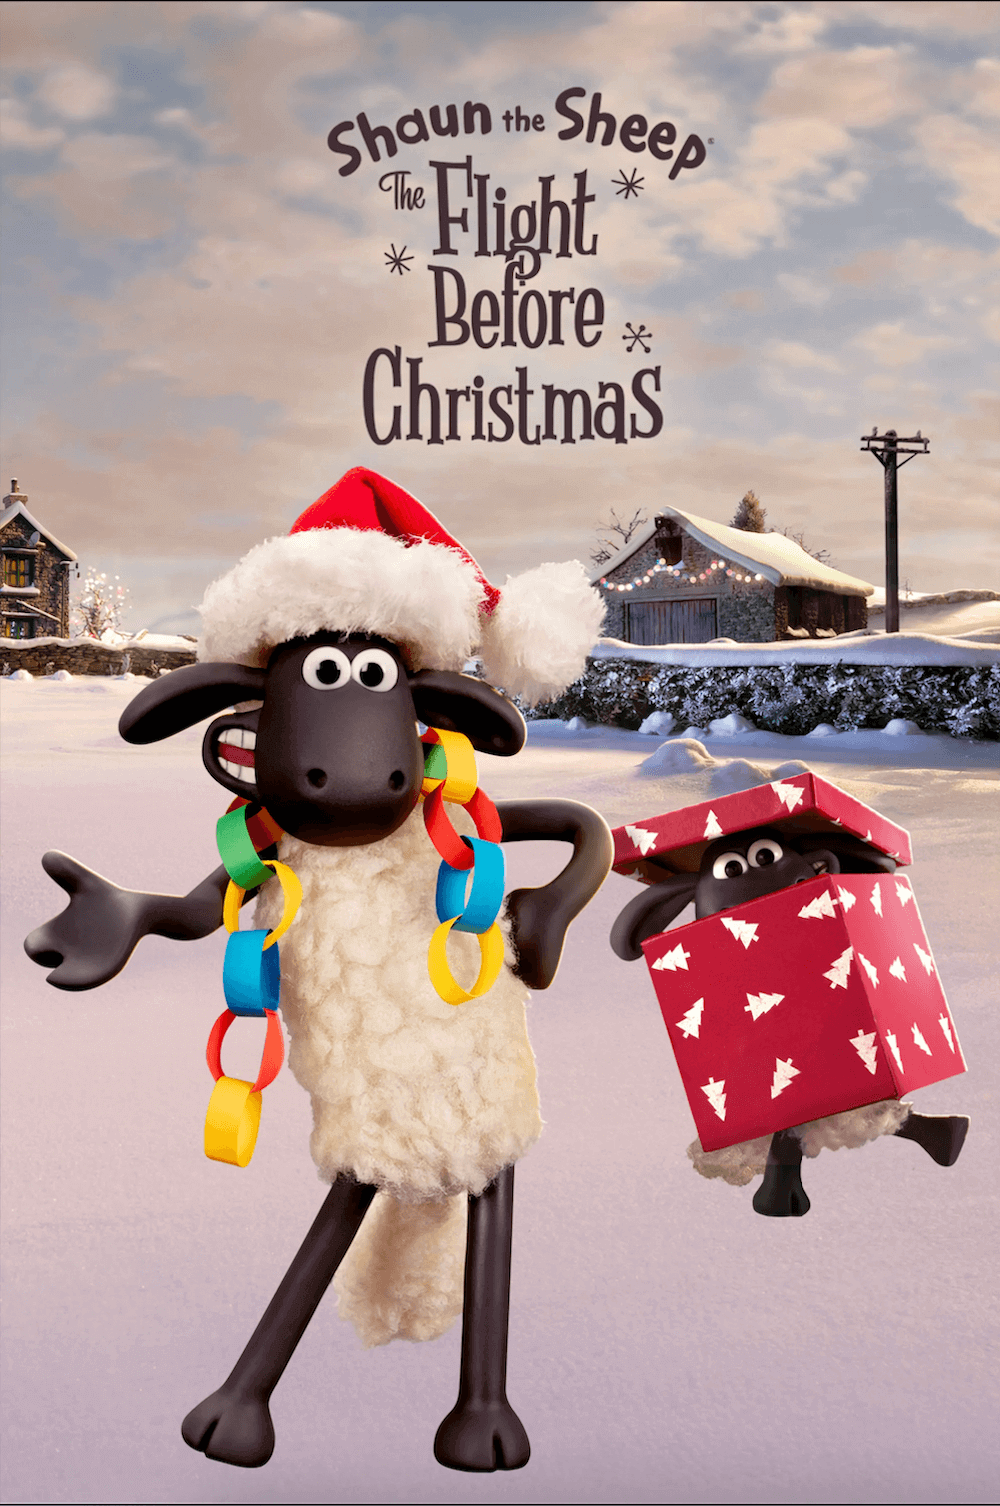 Shaun the Sheep: The Flight Before Christmas, one of the best movies for 5 year olds & short G rated movies on Netflix.